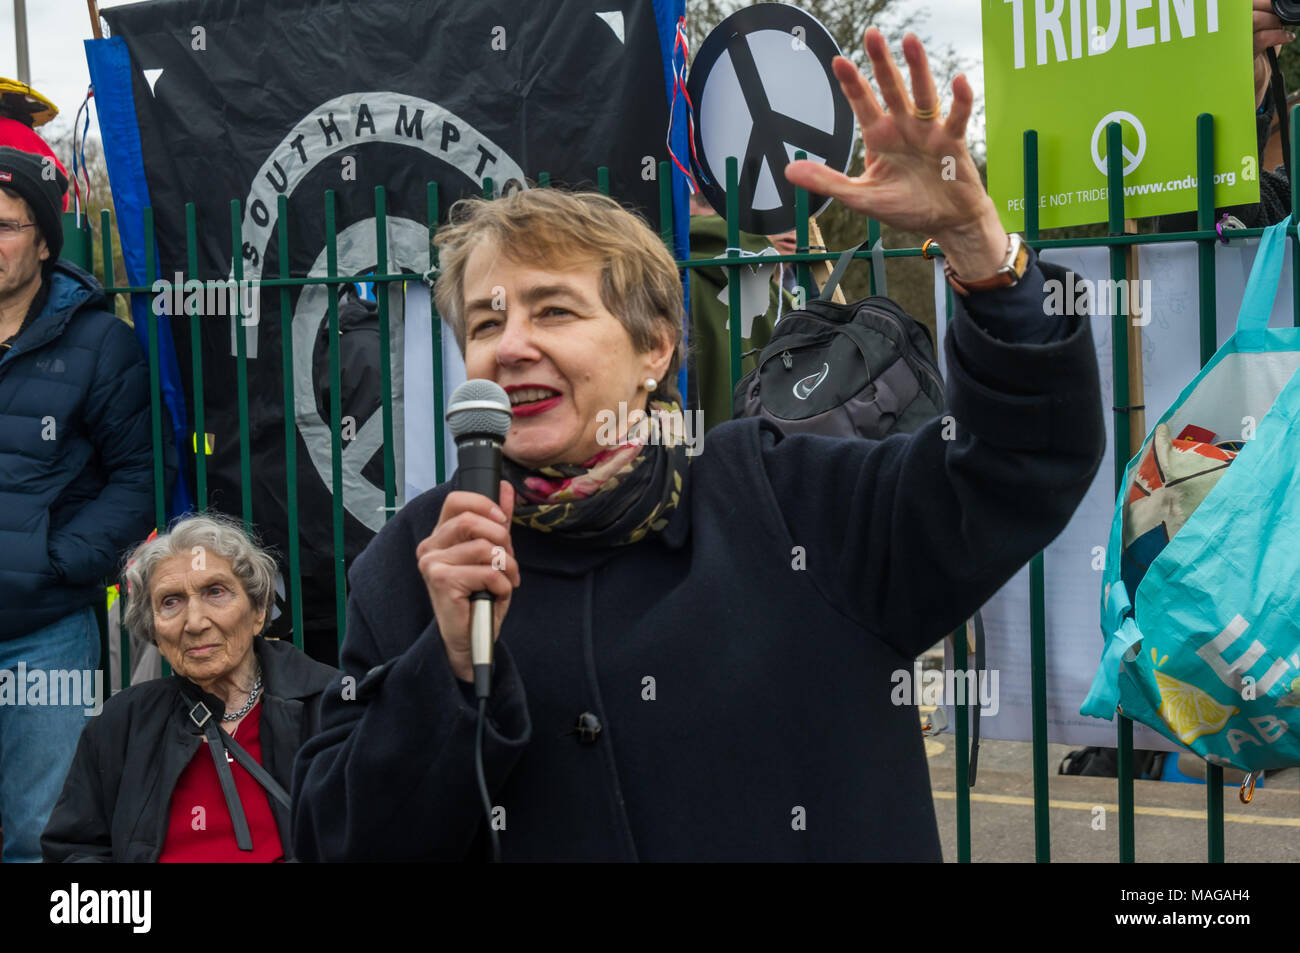 Aldermaston, UK. 1st Apr, 2018. Kate Hudson speaks as CND celebrates the 60th anniversary of the first Aldermaston march which mobilised thousands against the Bomb and shaped radical protest for generations. Their protest outside the Atomic Weapons Establishment included a giant, iconic peace symbol, speeches, including by some of those on the original march, singing and drumming and celebrated the UN treaty banning nuclear weapons. Campaign to abolish nuclear weapons. Credit: Peter Marshall/Alamy Live News Stock Photo